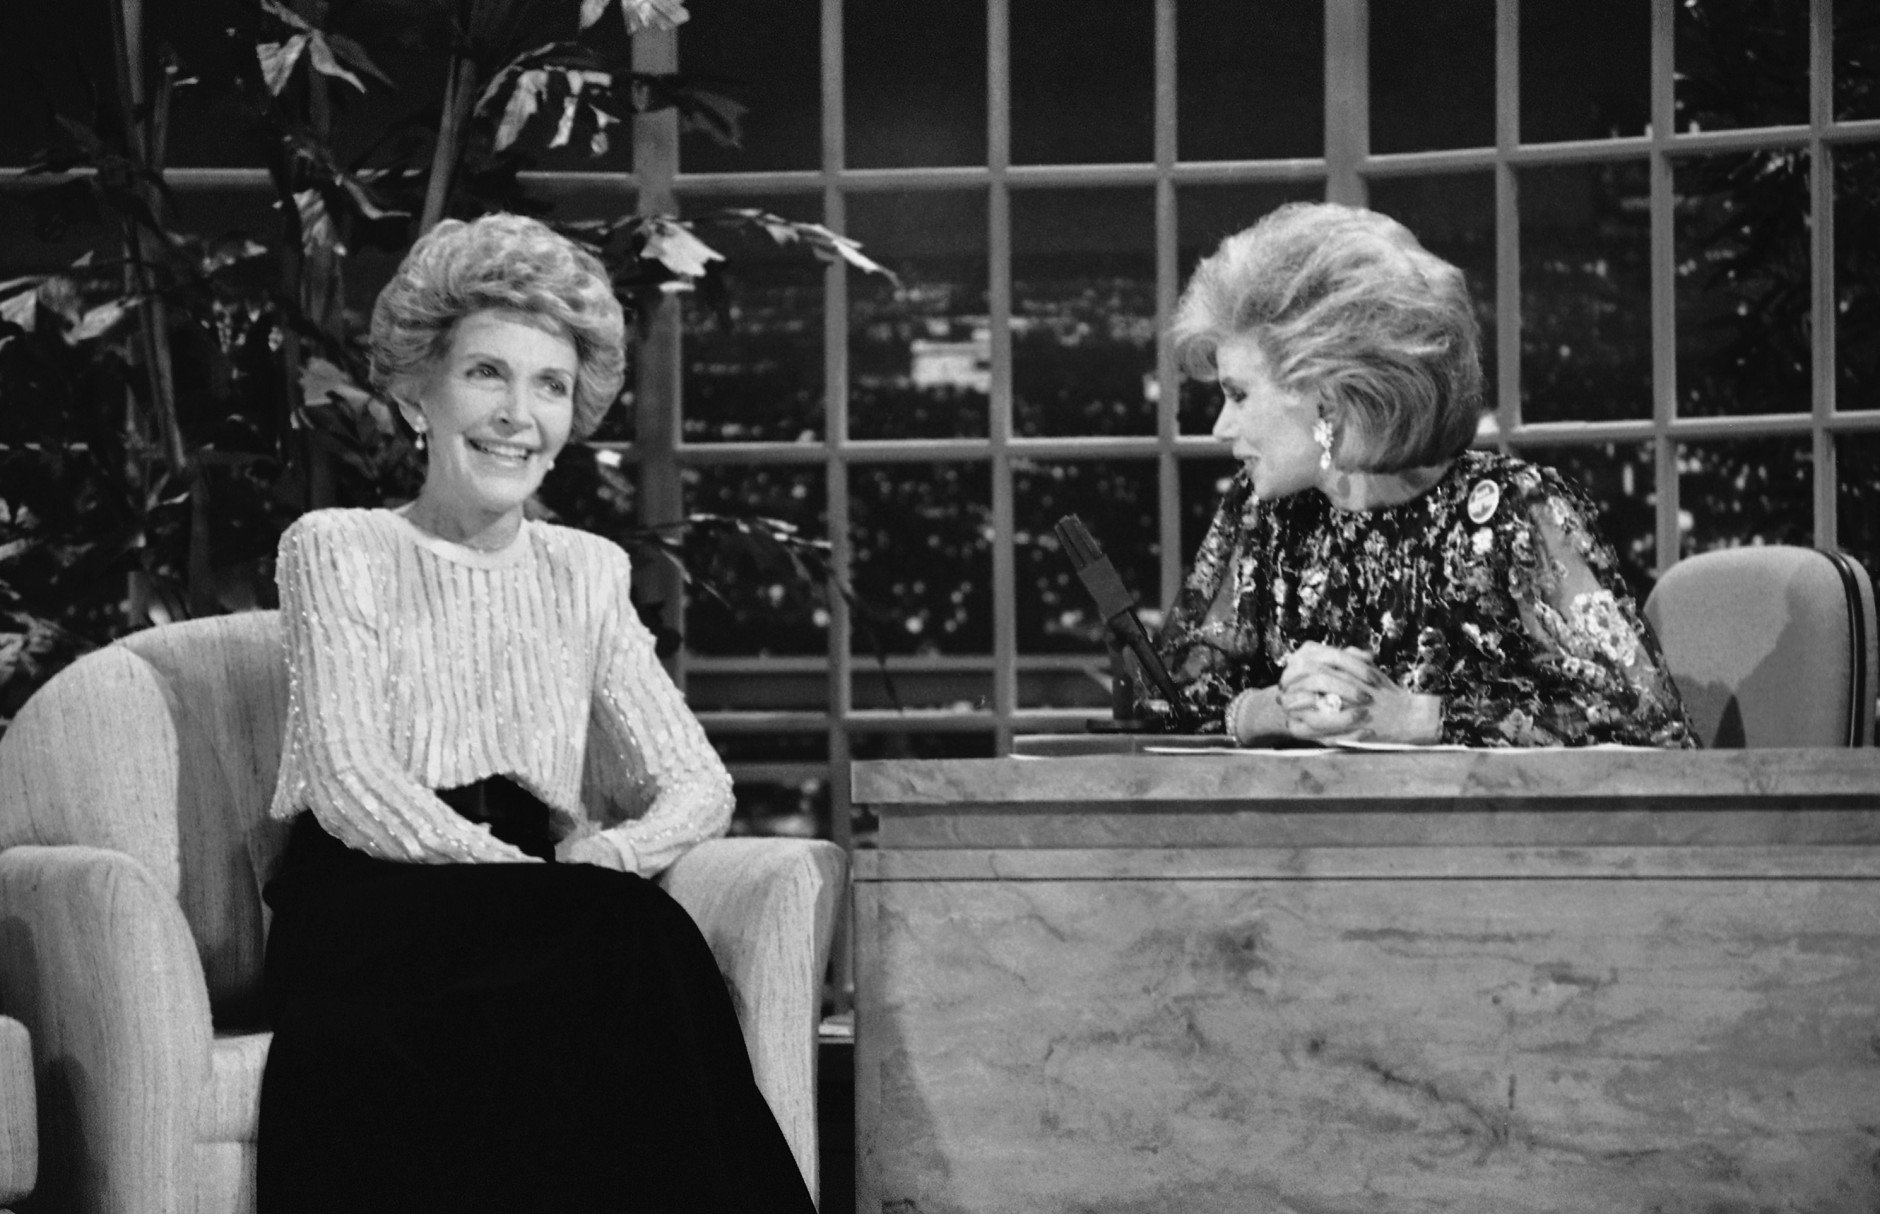 FILE - In this Oct. 30, 1986 file photo, talk show host Joan Rivers, right, talks with guest, first lady Nancy Reagan, during her appearance on "The Late Show Starring Joan Rivers," in Los Angeles. Rivers, the raucous, acid-tongued comedian who crashed the male-dominated realm of late-night talk shows and turned Hollywood red carpets into danger zones for badly dressed celebrities, died Thursday, Sept. 4, 2014. She was 81. Rivers was hospitalized Aug. 28, after going into cardiac arrest at a doctor's office. (AP Photo, Reed Saxon, File)